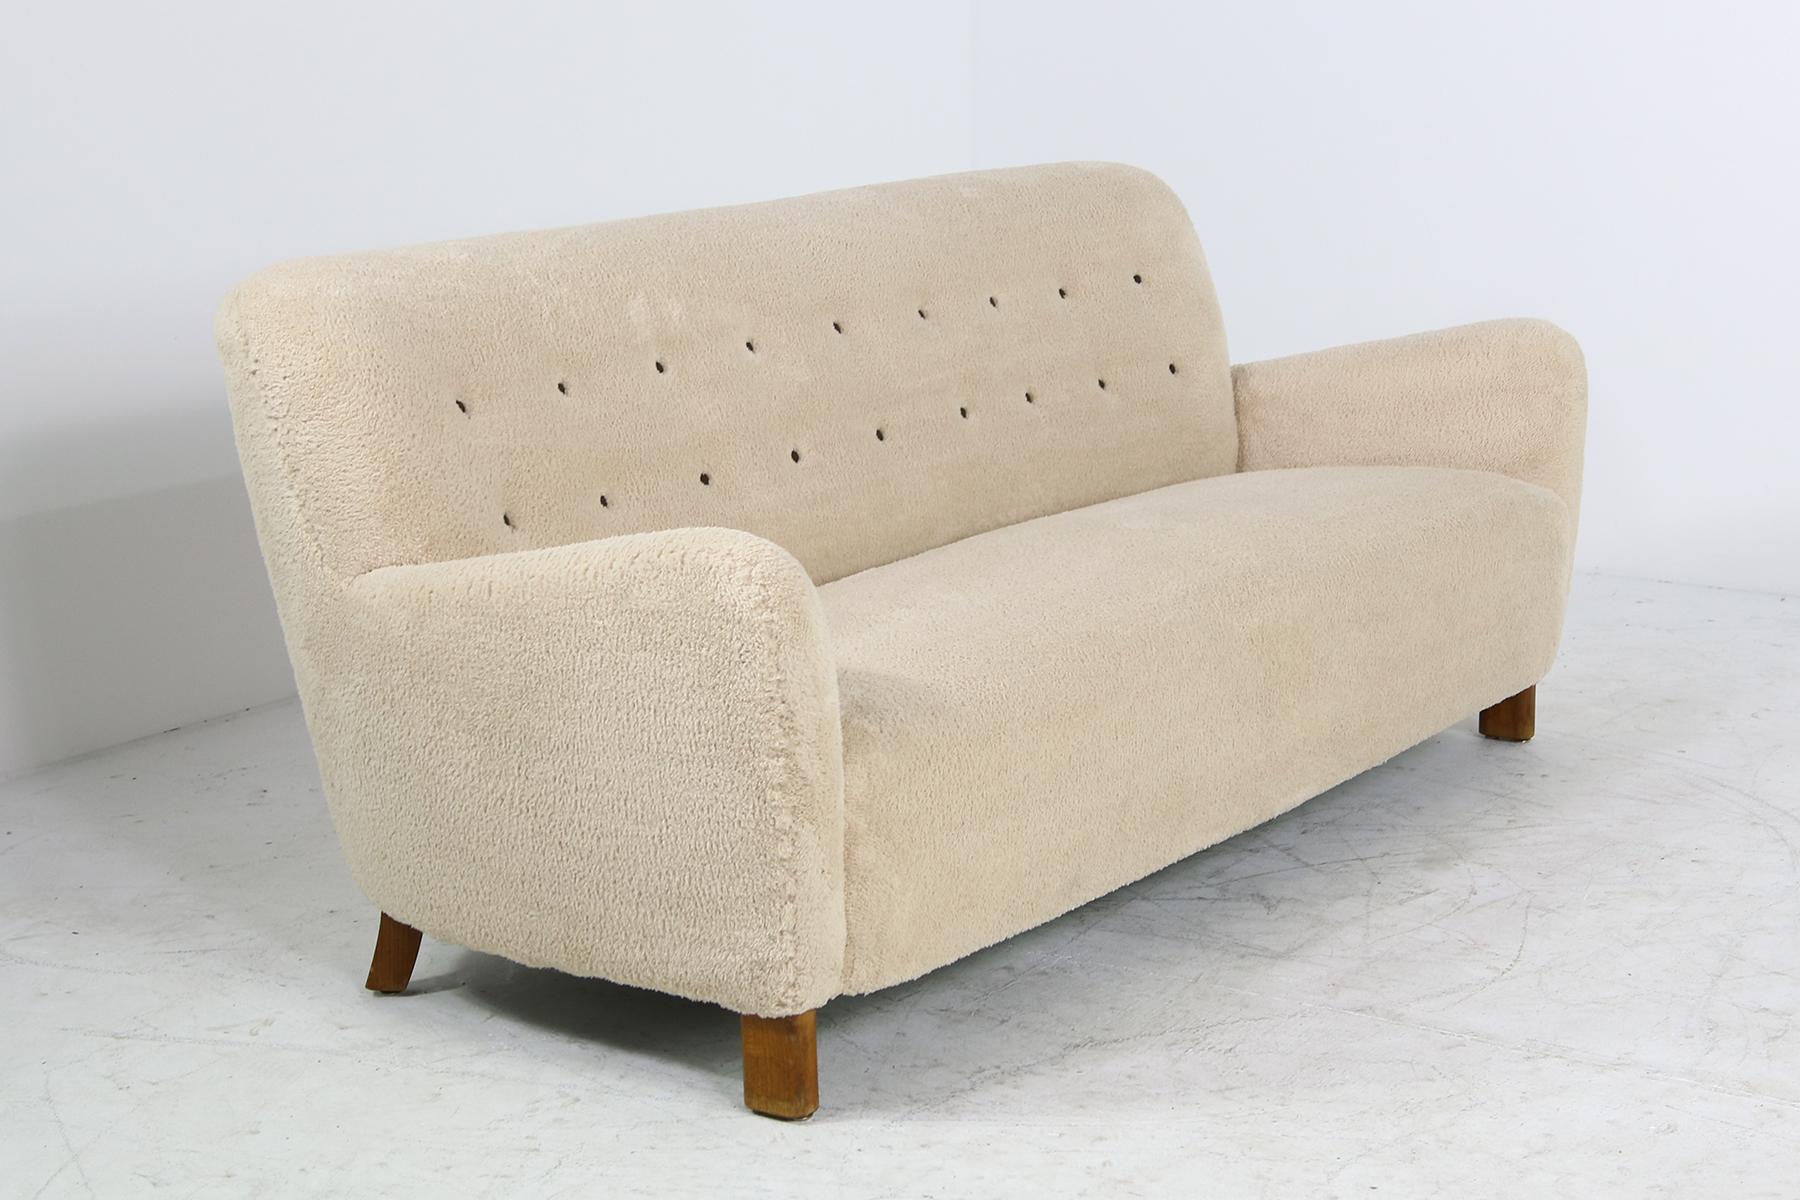 Beautiful and in this style, unique Fritz Hansen sofa 1669, solid beechwood legs, completely reupholstered and professionally renewed upholstery, since this time, never used, the condition is amazing, the fabric super soft, real leather buttons